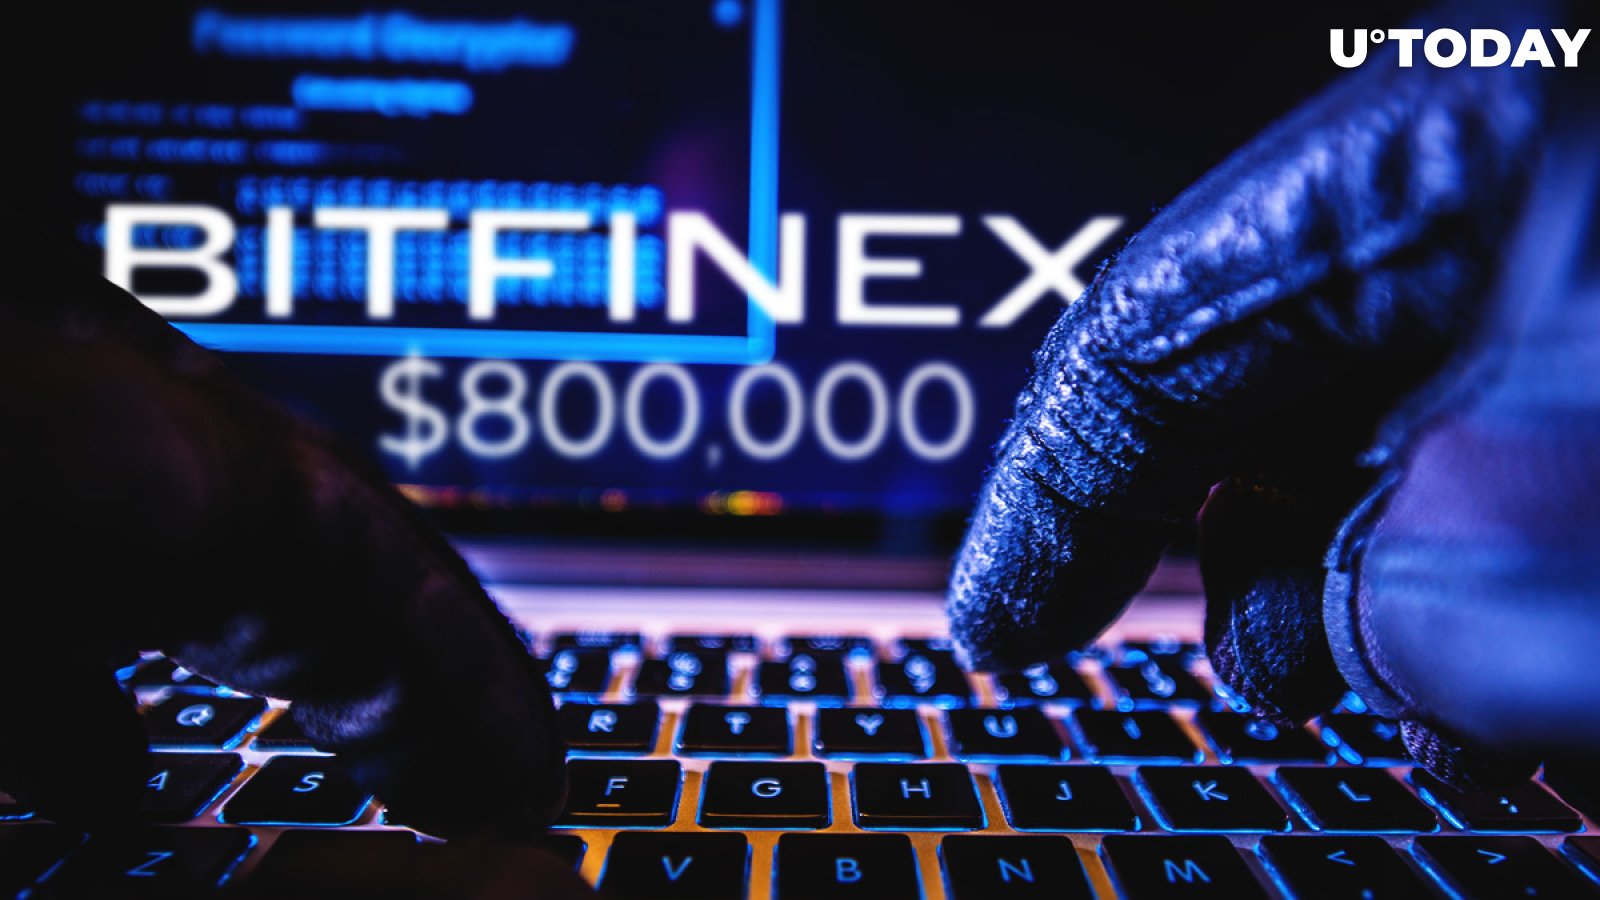 Hackers Wire Nearly $800,000 in Bitcoin Stolen from Bitfinex in 2016